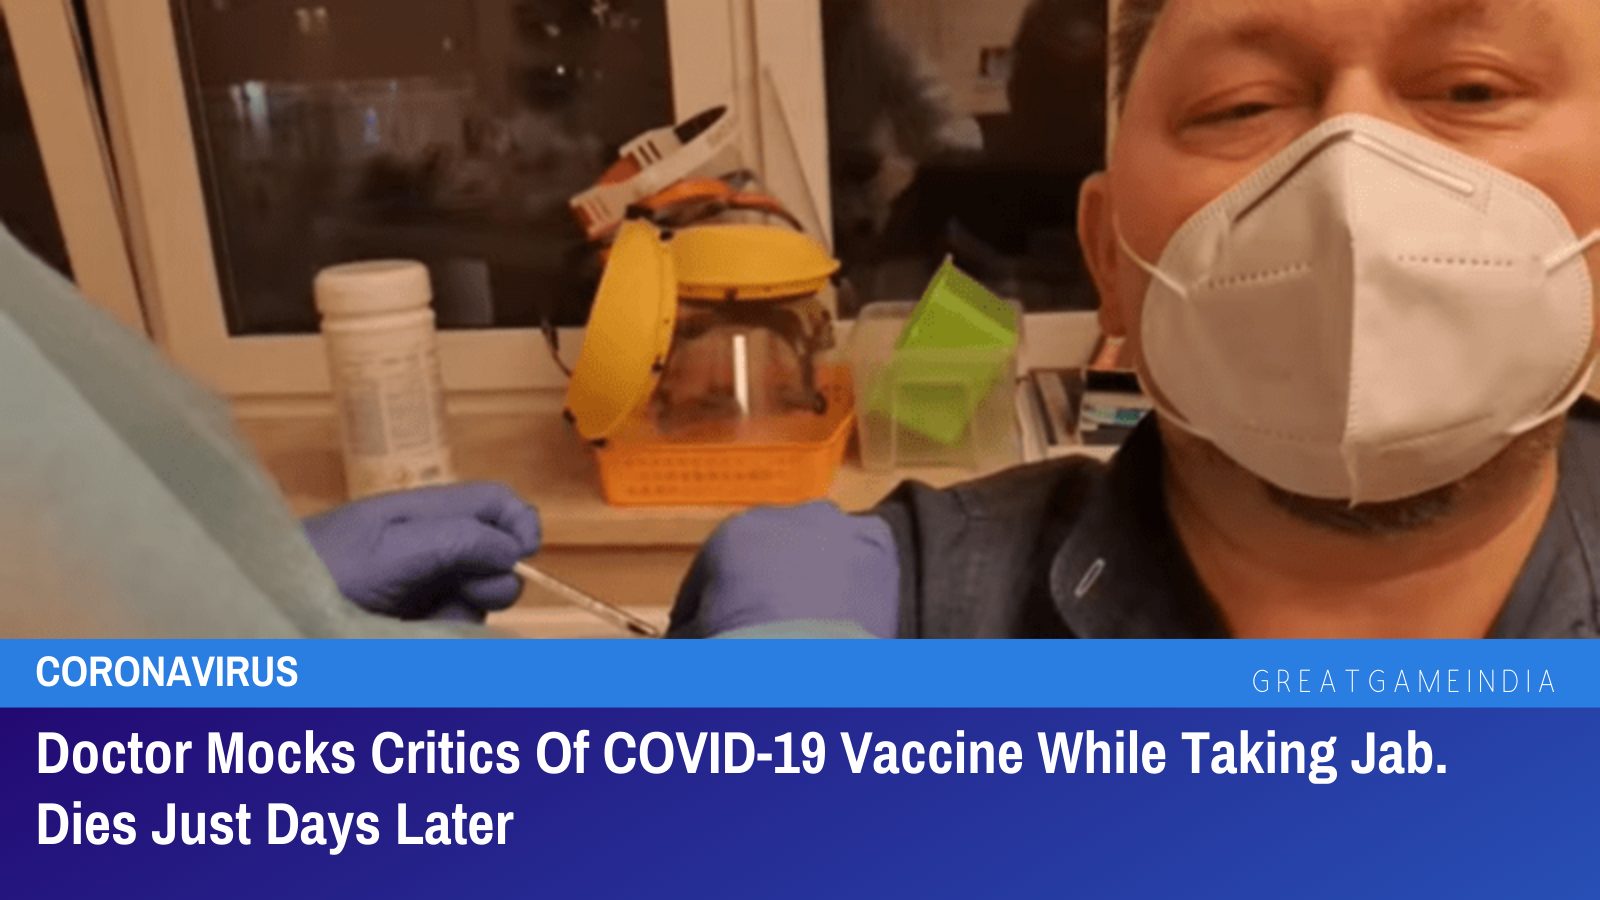 Polish Doctor Mocks Critics Of COVID-19 Vaccine While Taking Jab. Dies Just Days Later | GreatGameIndia